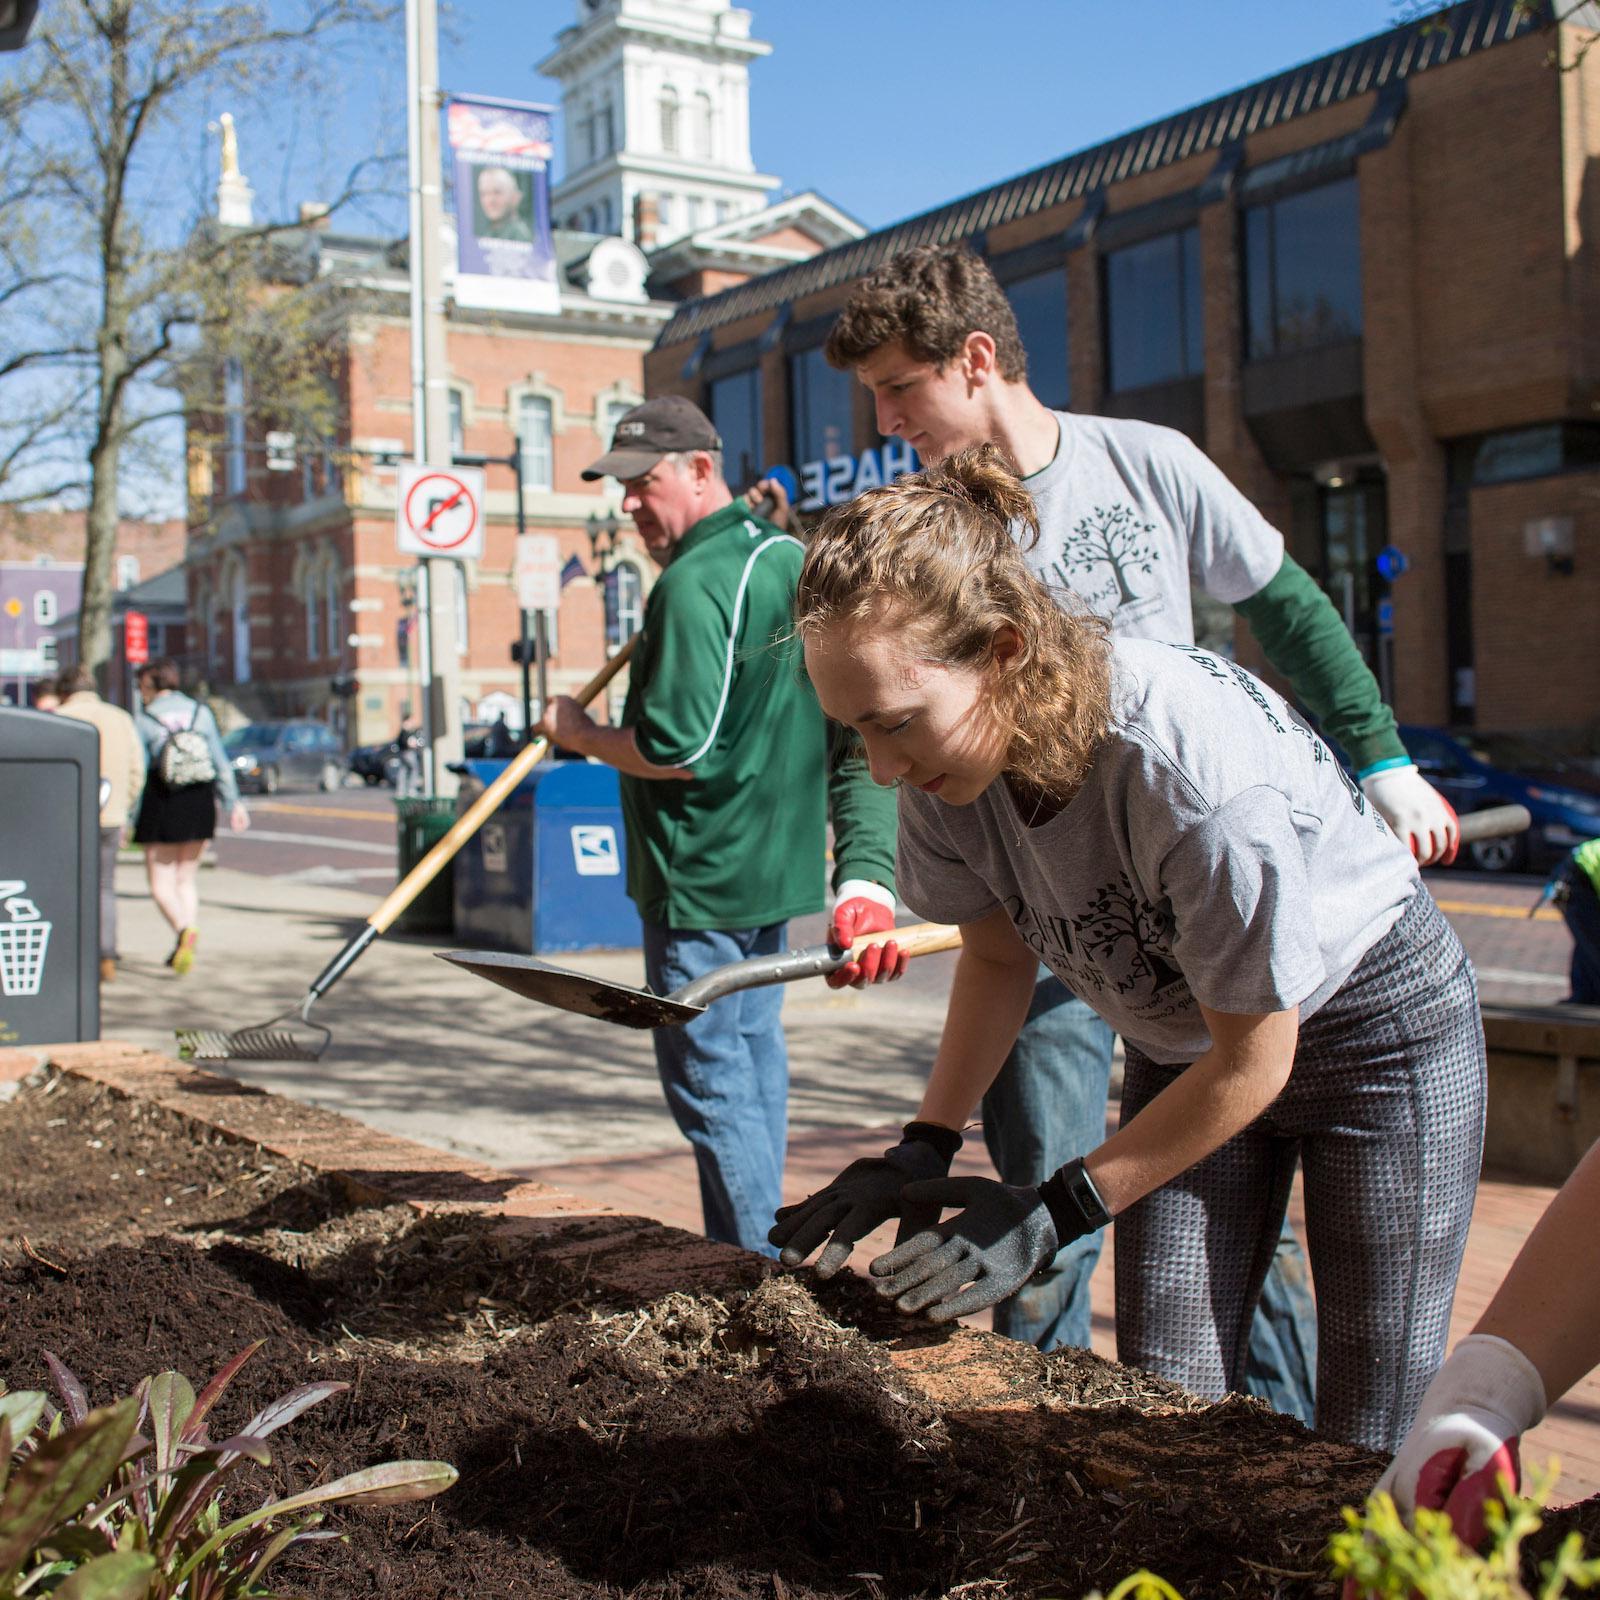 Volunteers help pull weeds and add new plants outside of the City Building